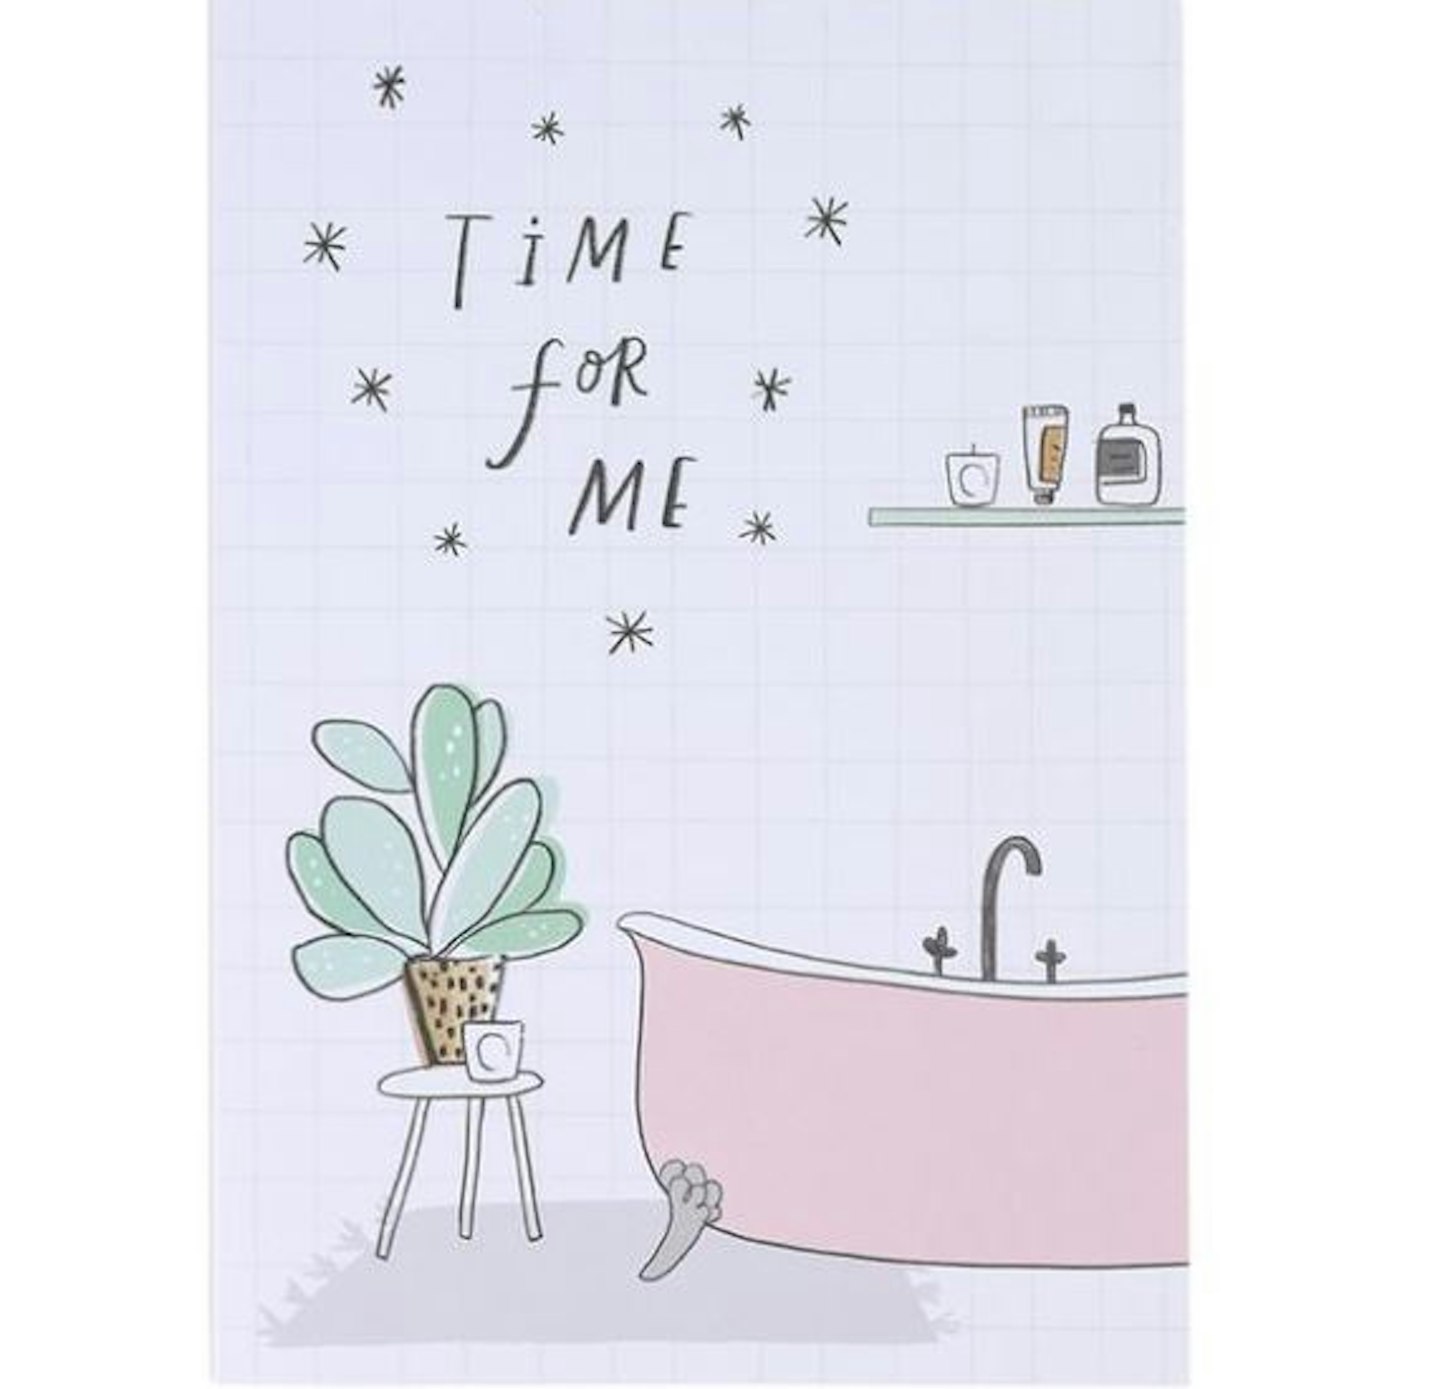 Self-Care Journal from Paperchase